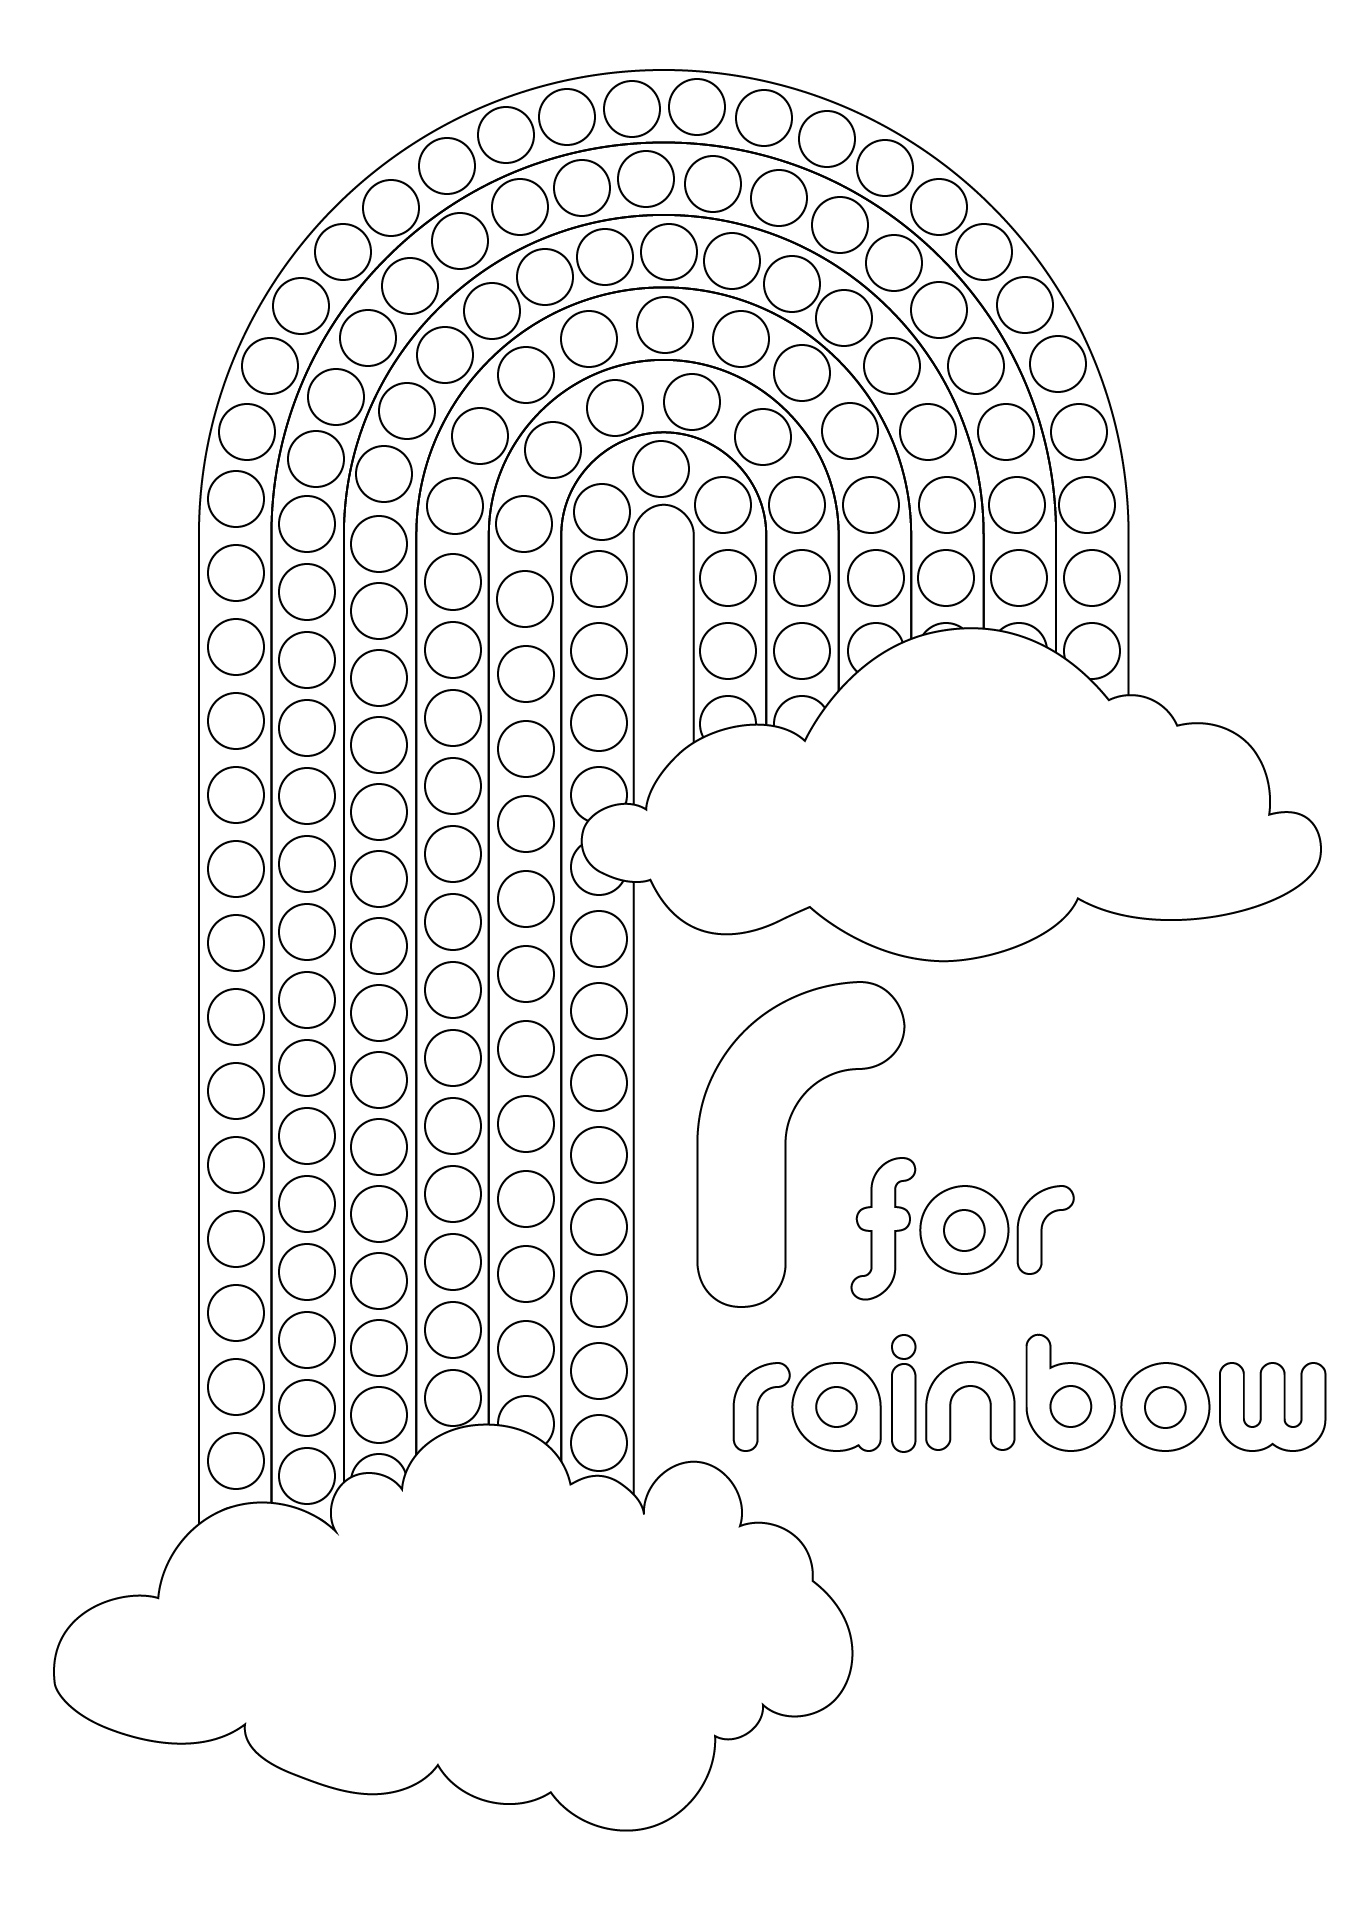 Printable Coloring Pages Of Rainbows